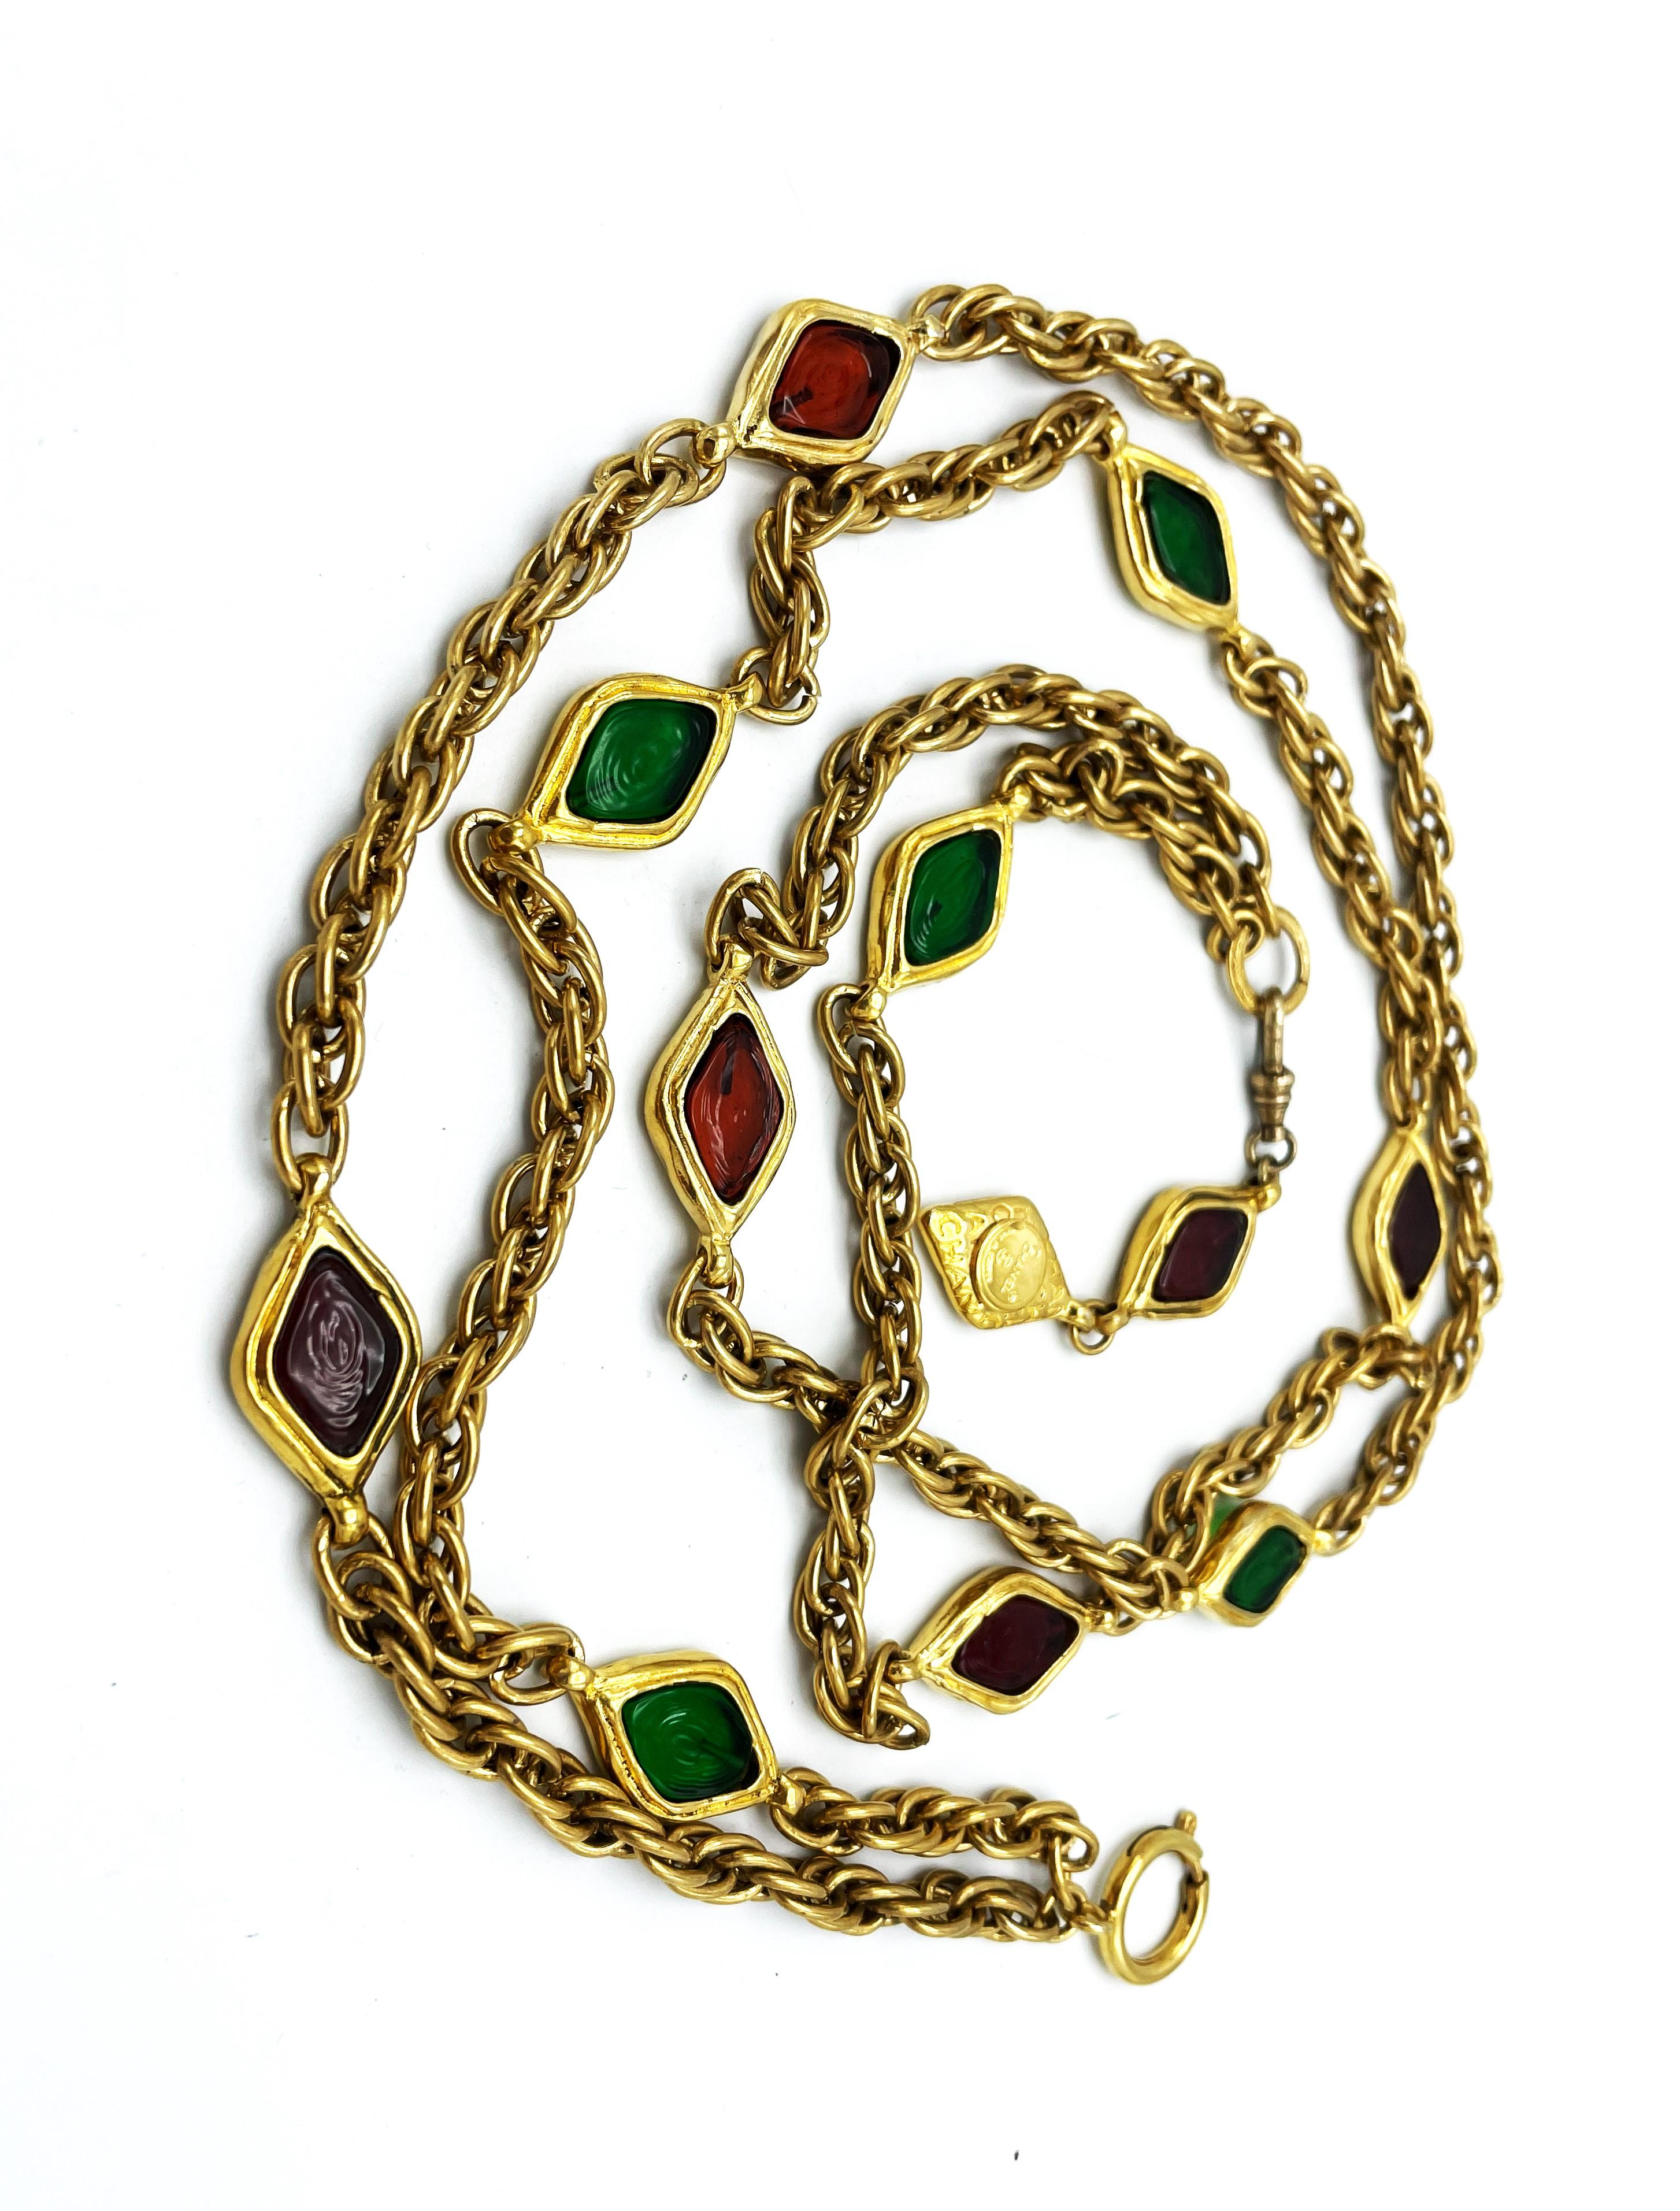  2 row Chanel necklace with red and green pate the verre, gold plated, 1970/80's For Sale 7